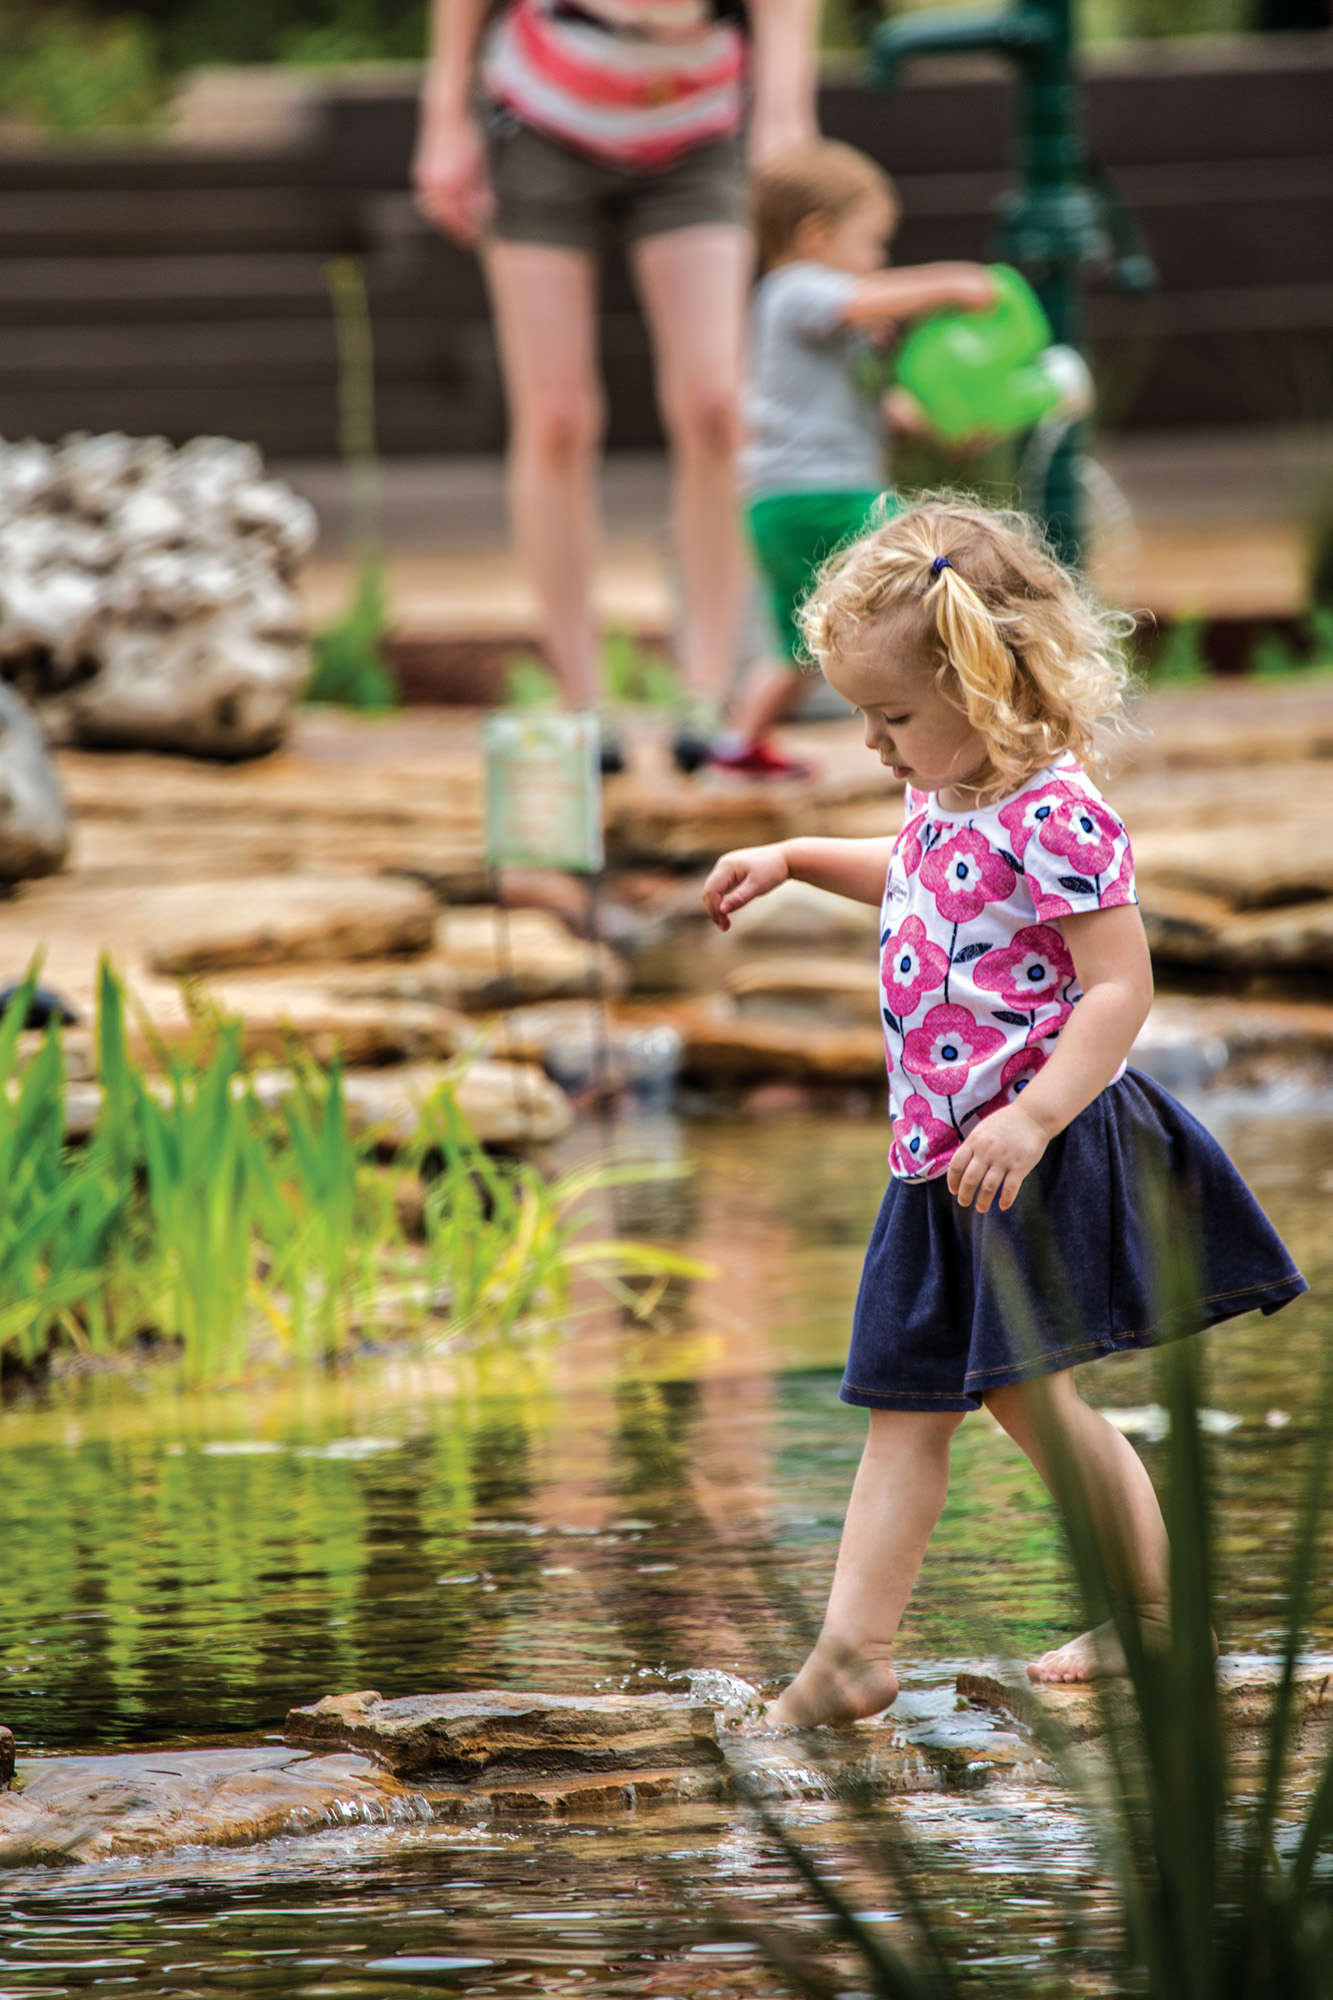 A child dips her toes into a pond at the Lady Bird Johnson Wildflower Center's Family Garden that recreates the Paluxy River ecosystem in which Dinosaur Tracks were found in Glen Rose. A woman and a younger boy stand in the background